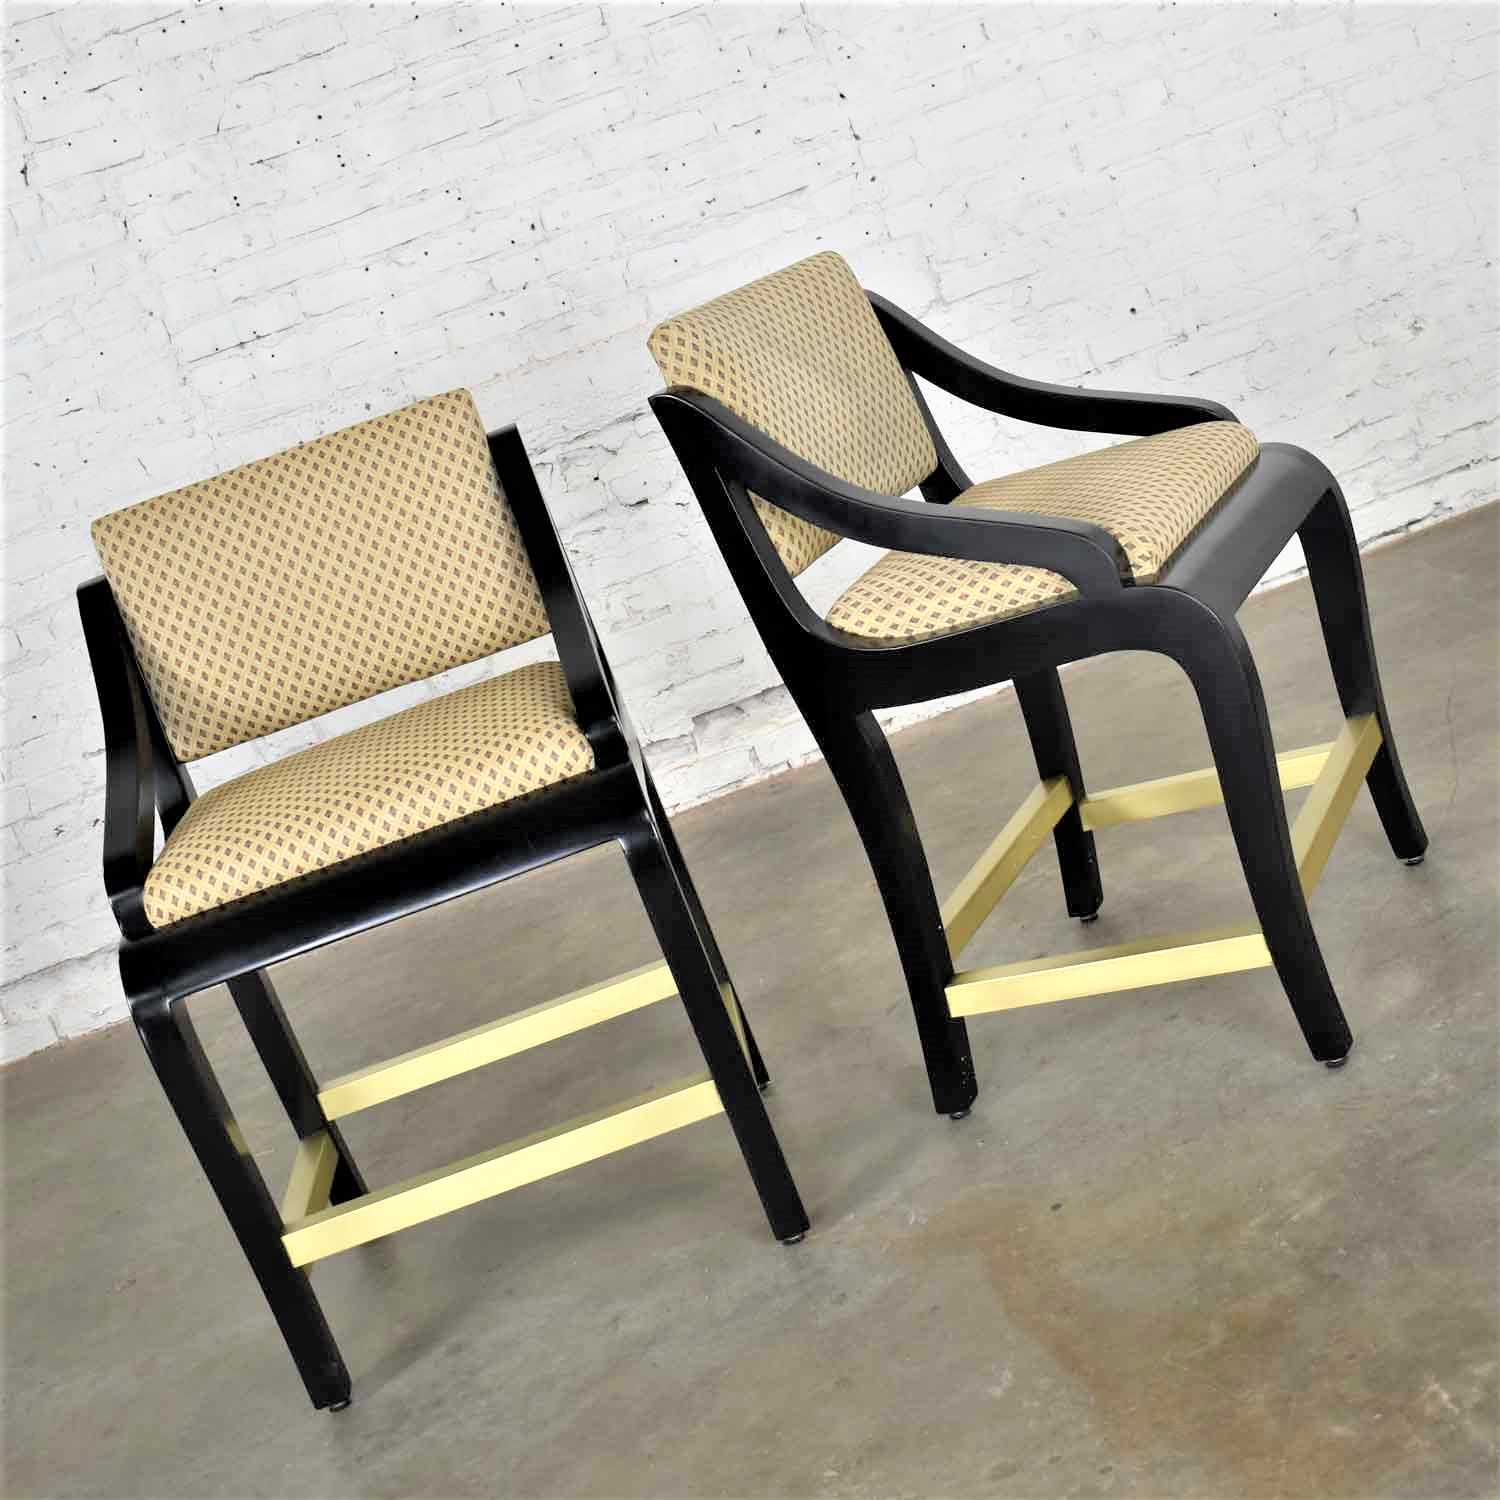 Vintage Modern Black Painted Brass & Upholstered Counter Height Bar Stools, a Pair